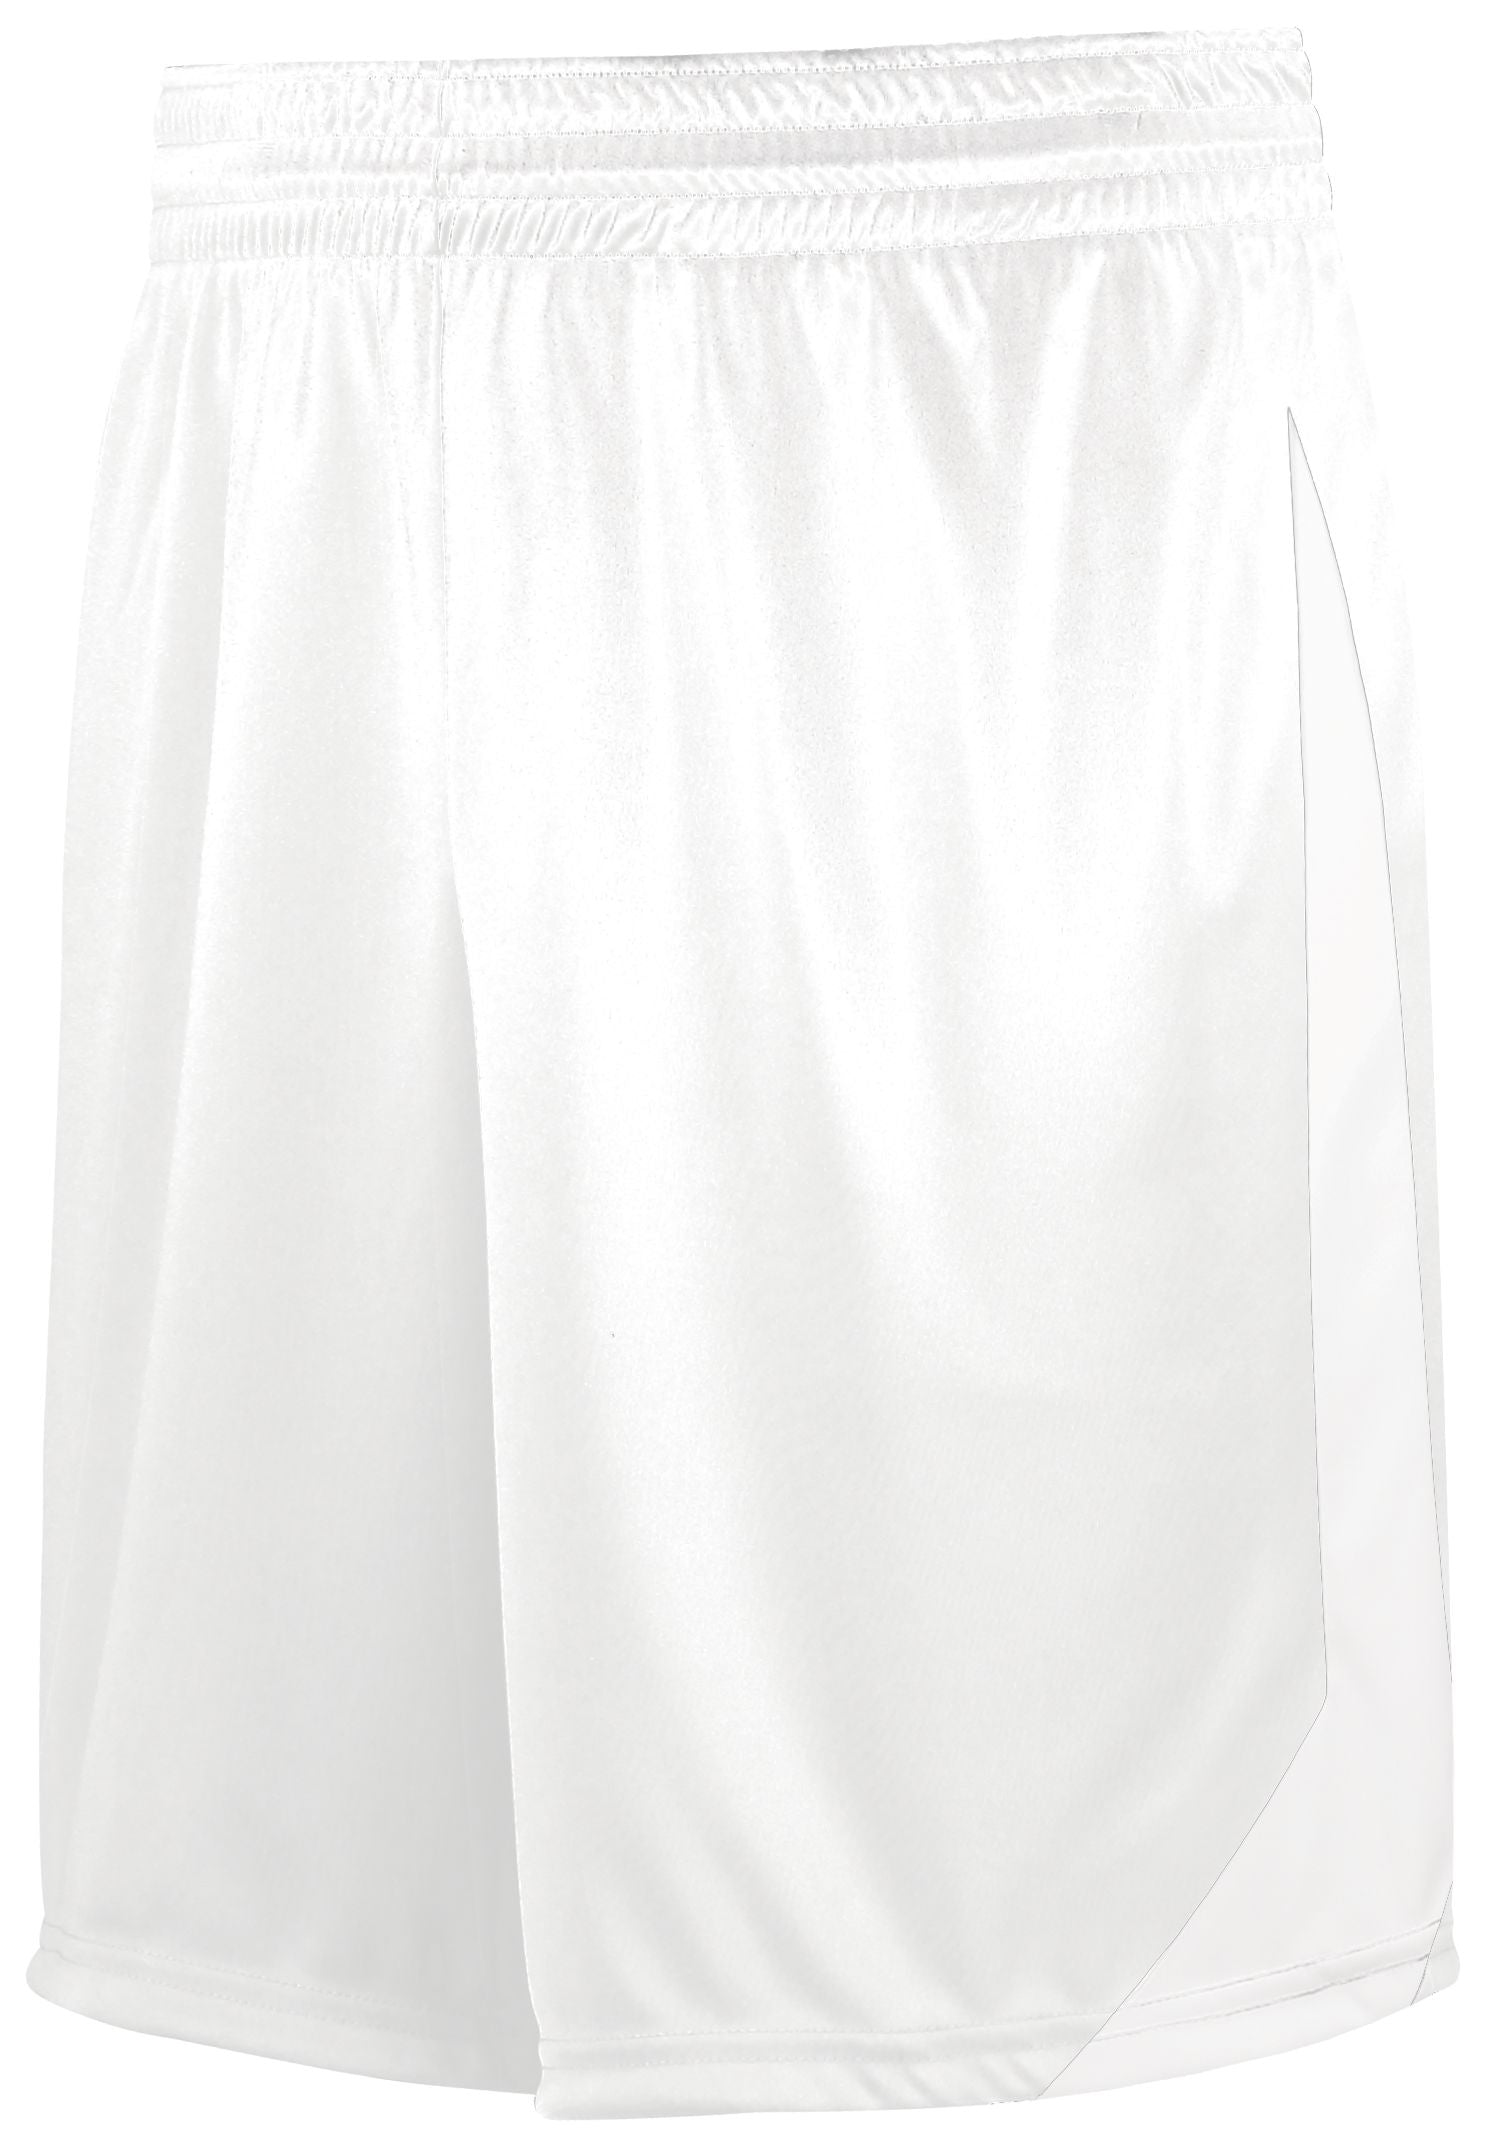 High 5 Athletico Shorts in White  -Part of the Adult, Adult-Shorts, High5-Products, Soccer, All-Sports-1 product lines at KanaleyCreations.com